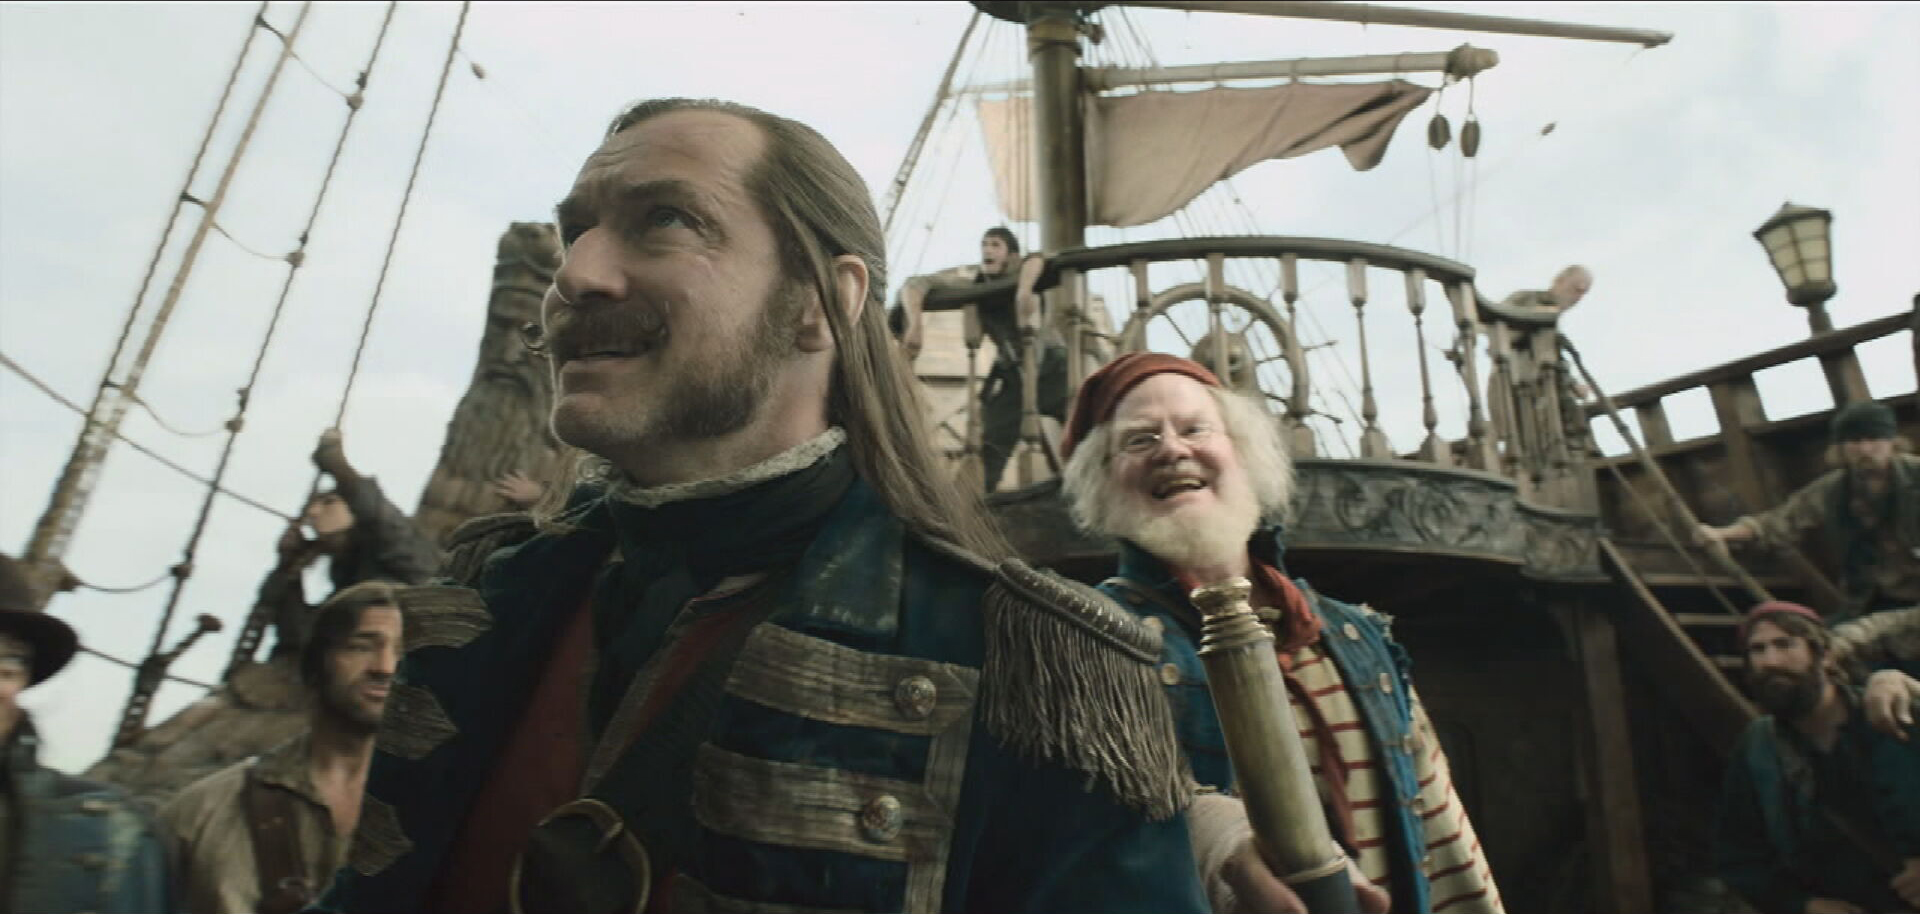 PHOTO: In this still image from "Peter Pan & Wendy," Jude Law and Jim Gaffigan are seen playing Hook and Smee respectively.